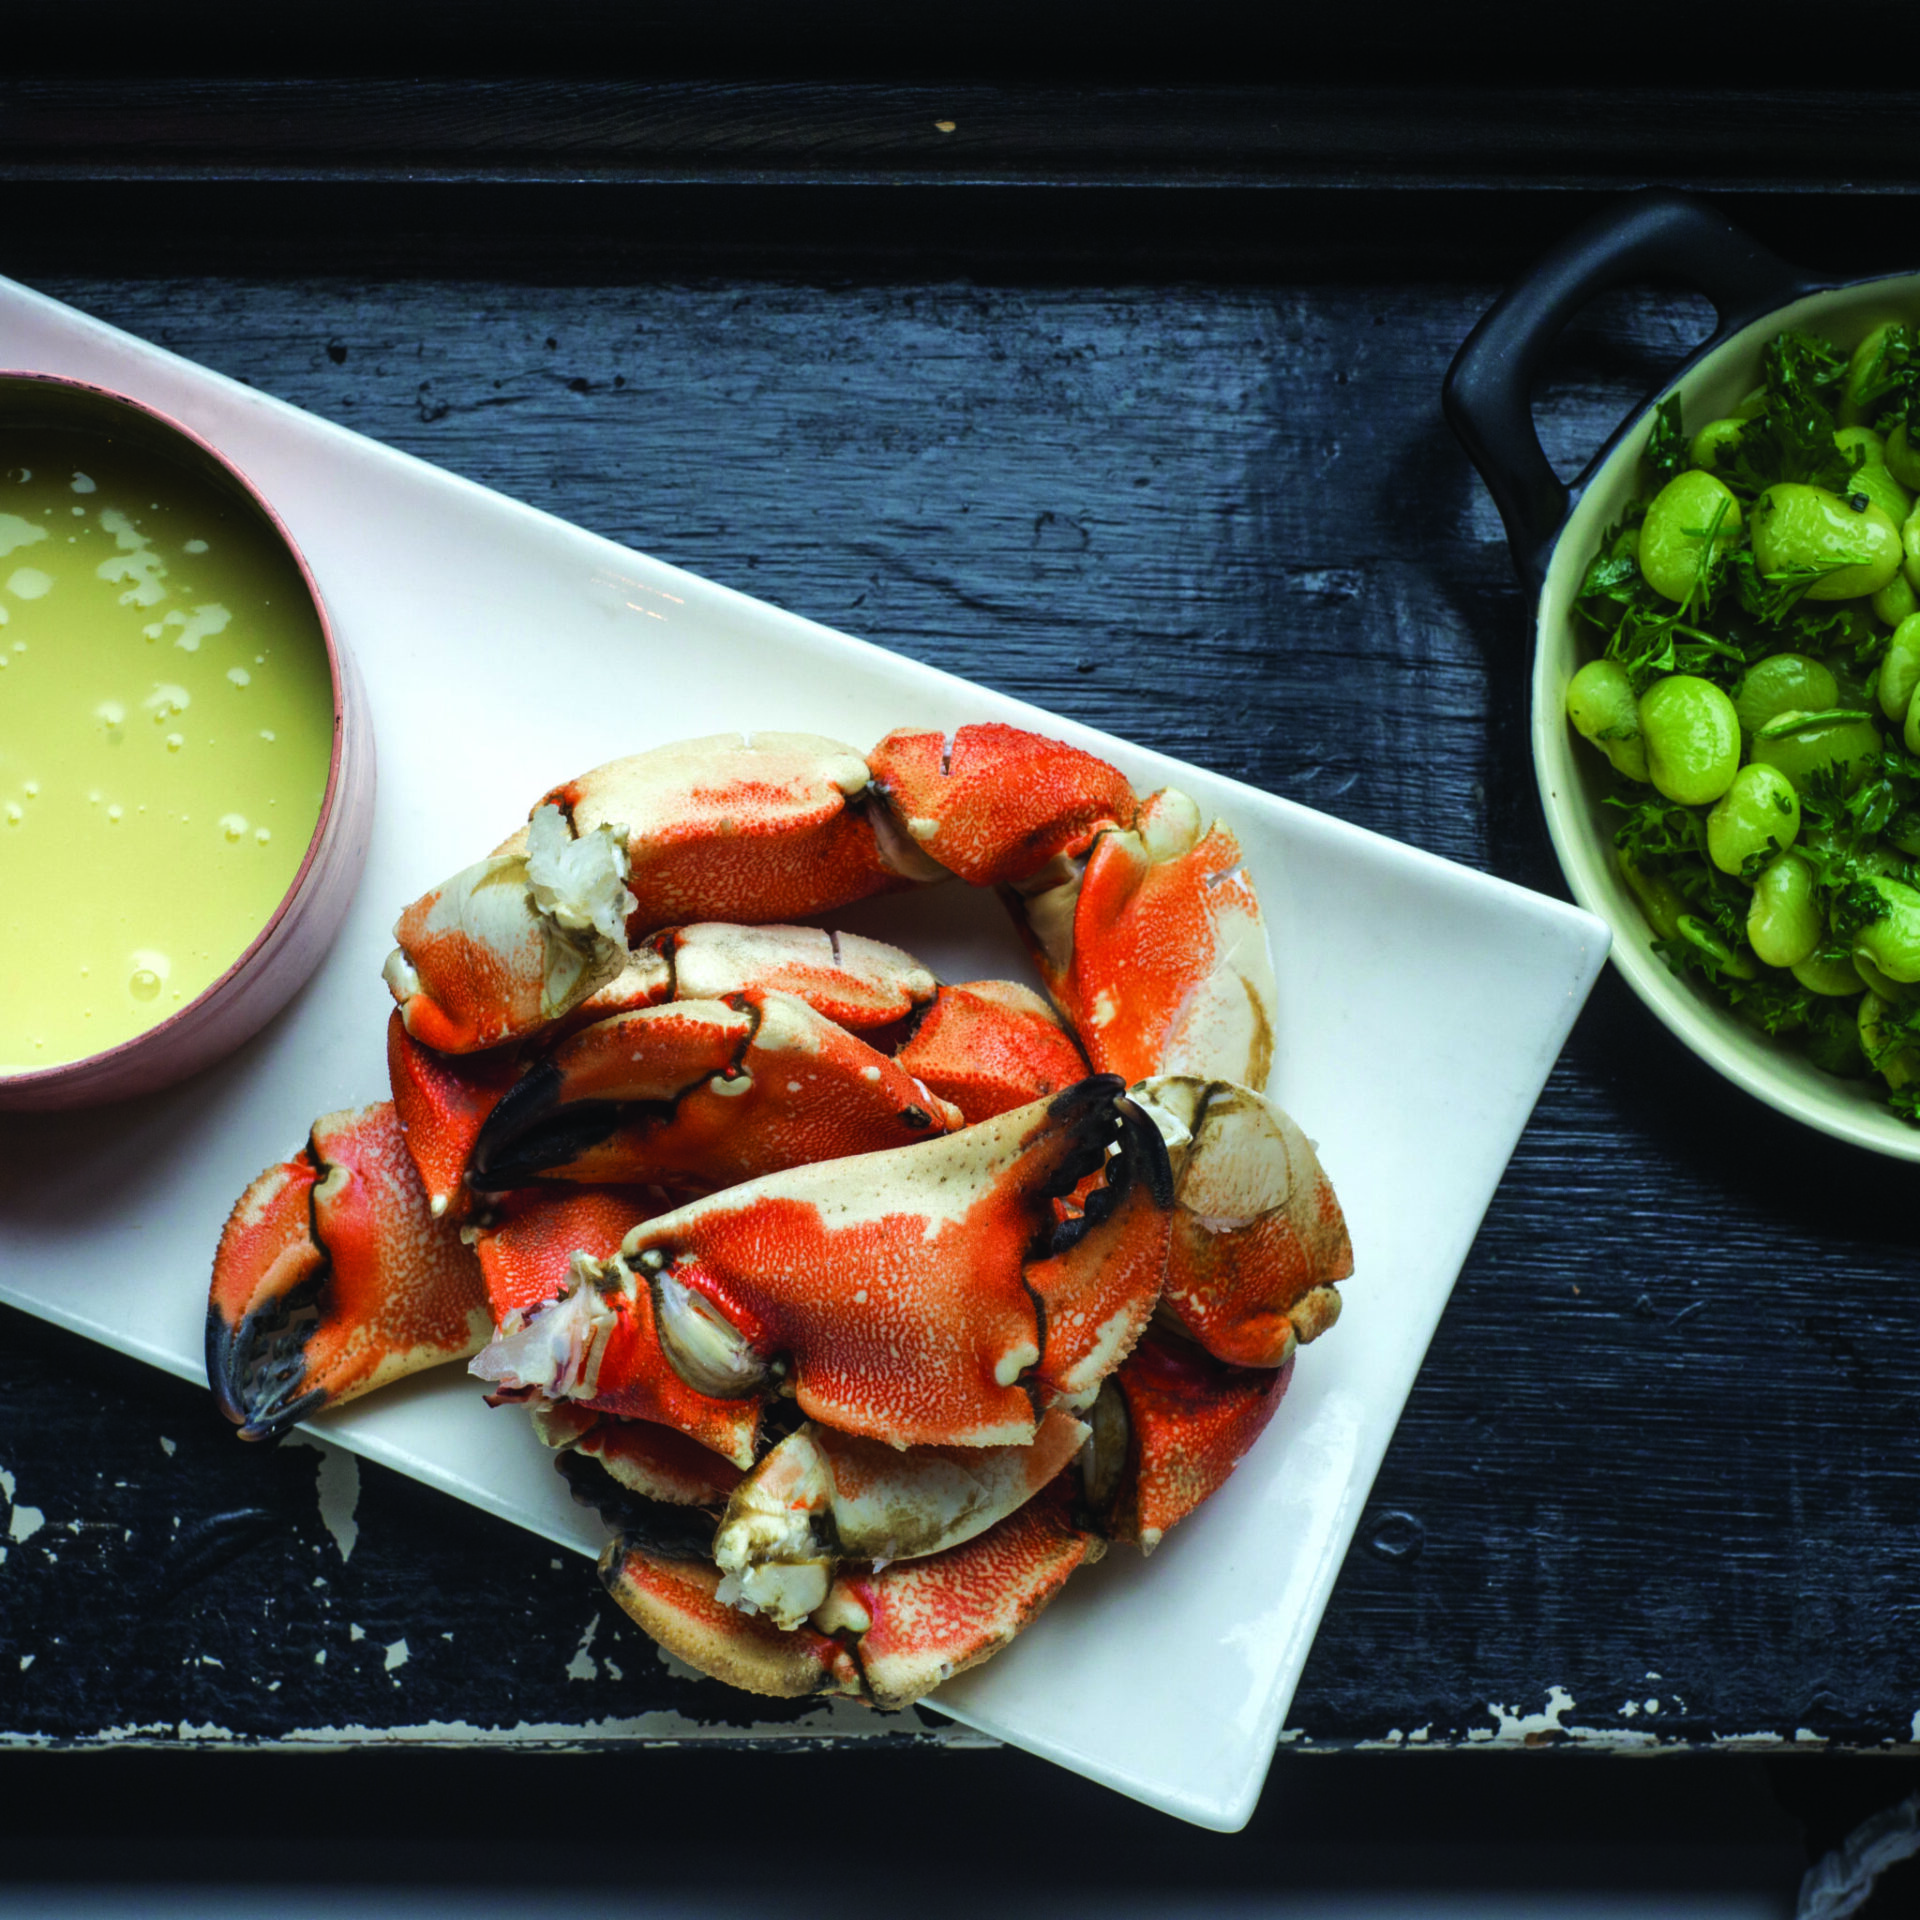 Folly Pier Stone Crab with Butterbeans and Beurre Blanc